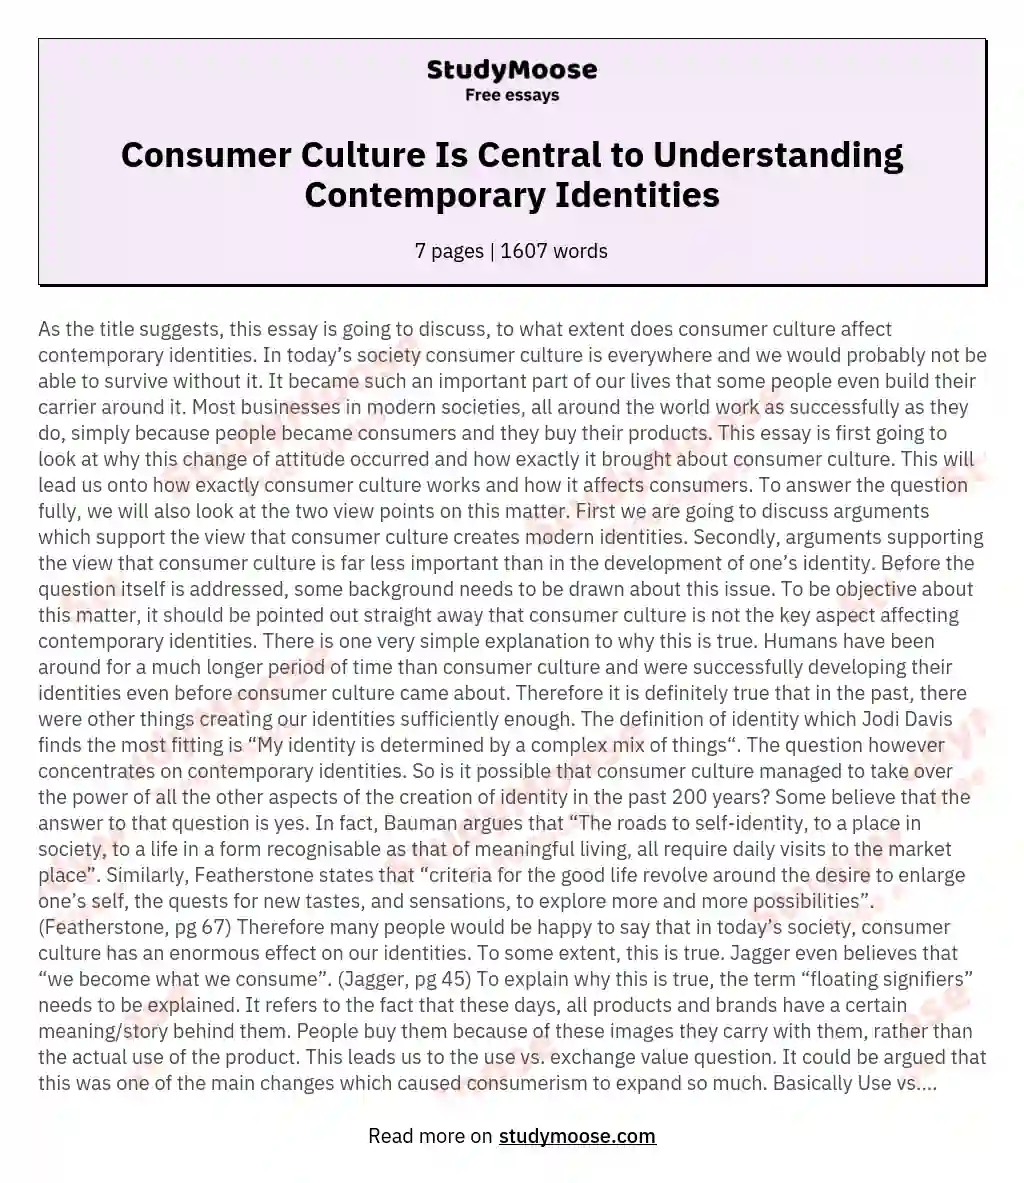 Consumer Culture Is Central to Understanding Contemporary Identities essay